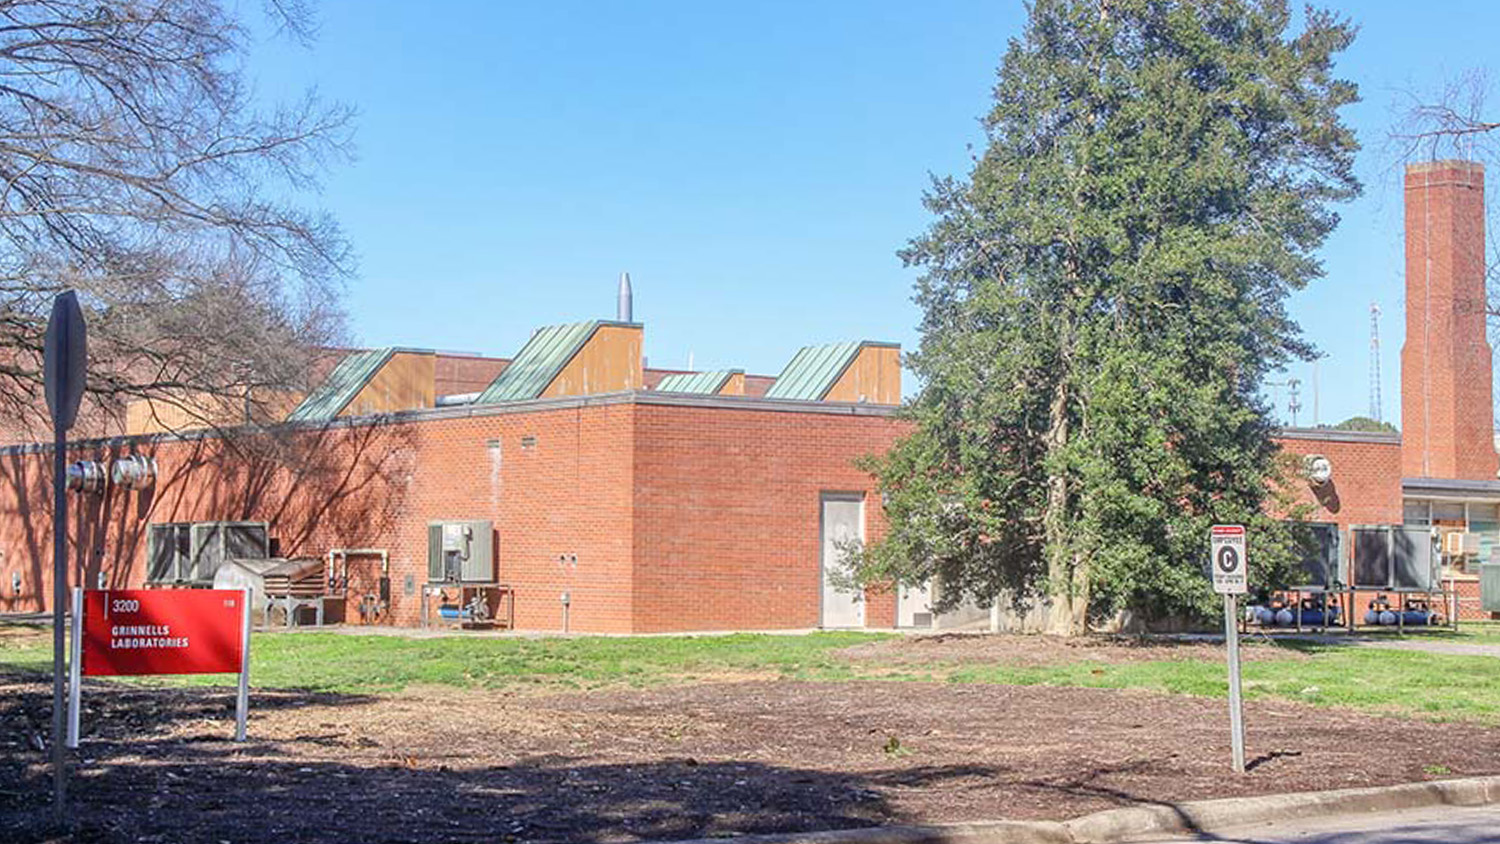 A large brick building with trees in the foreground